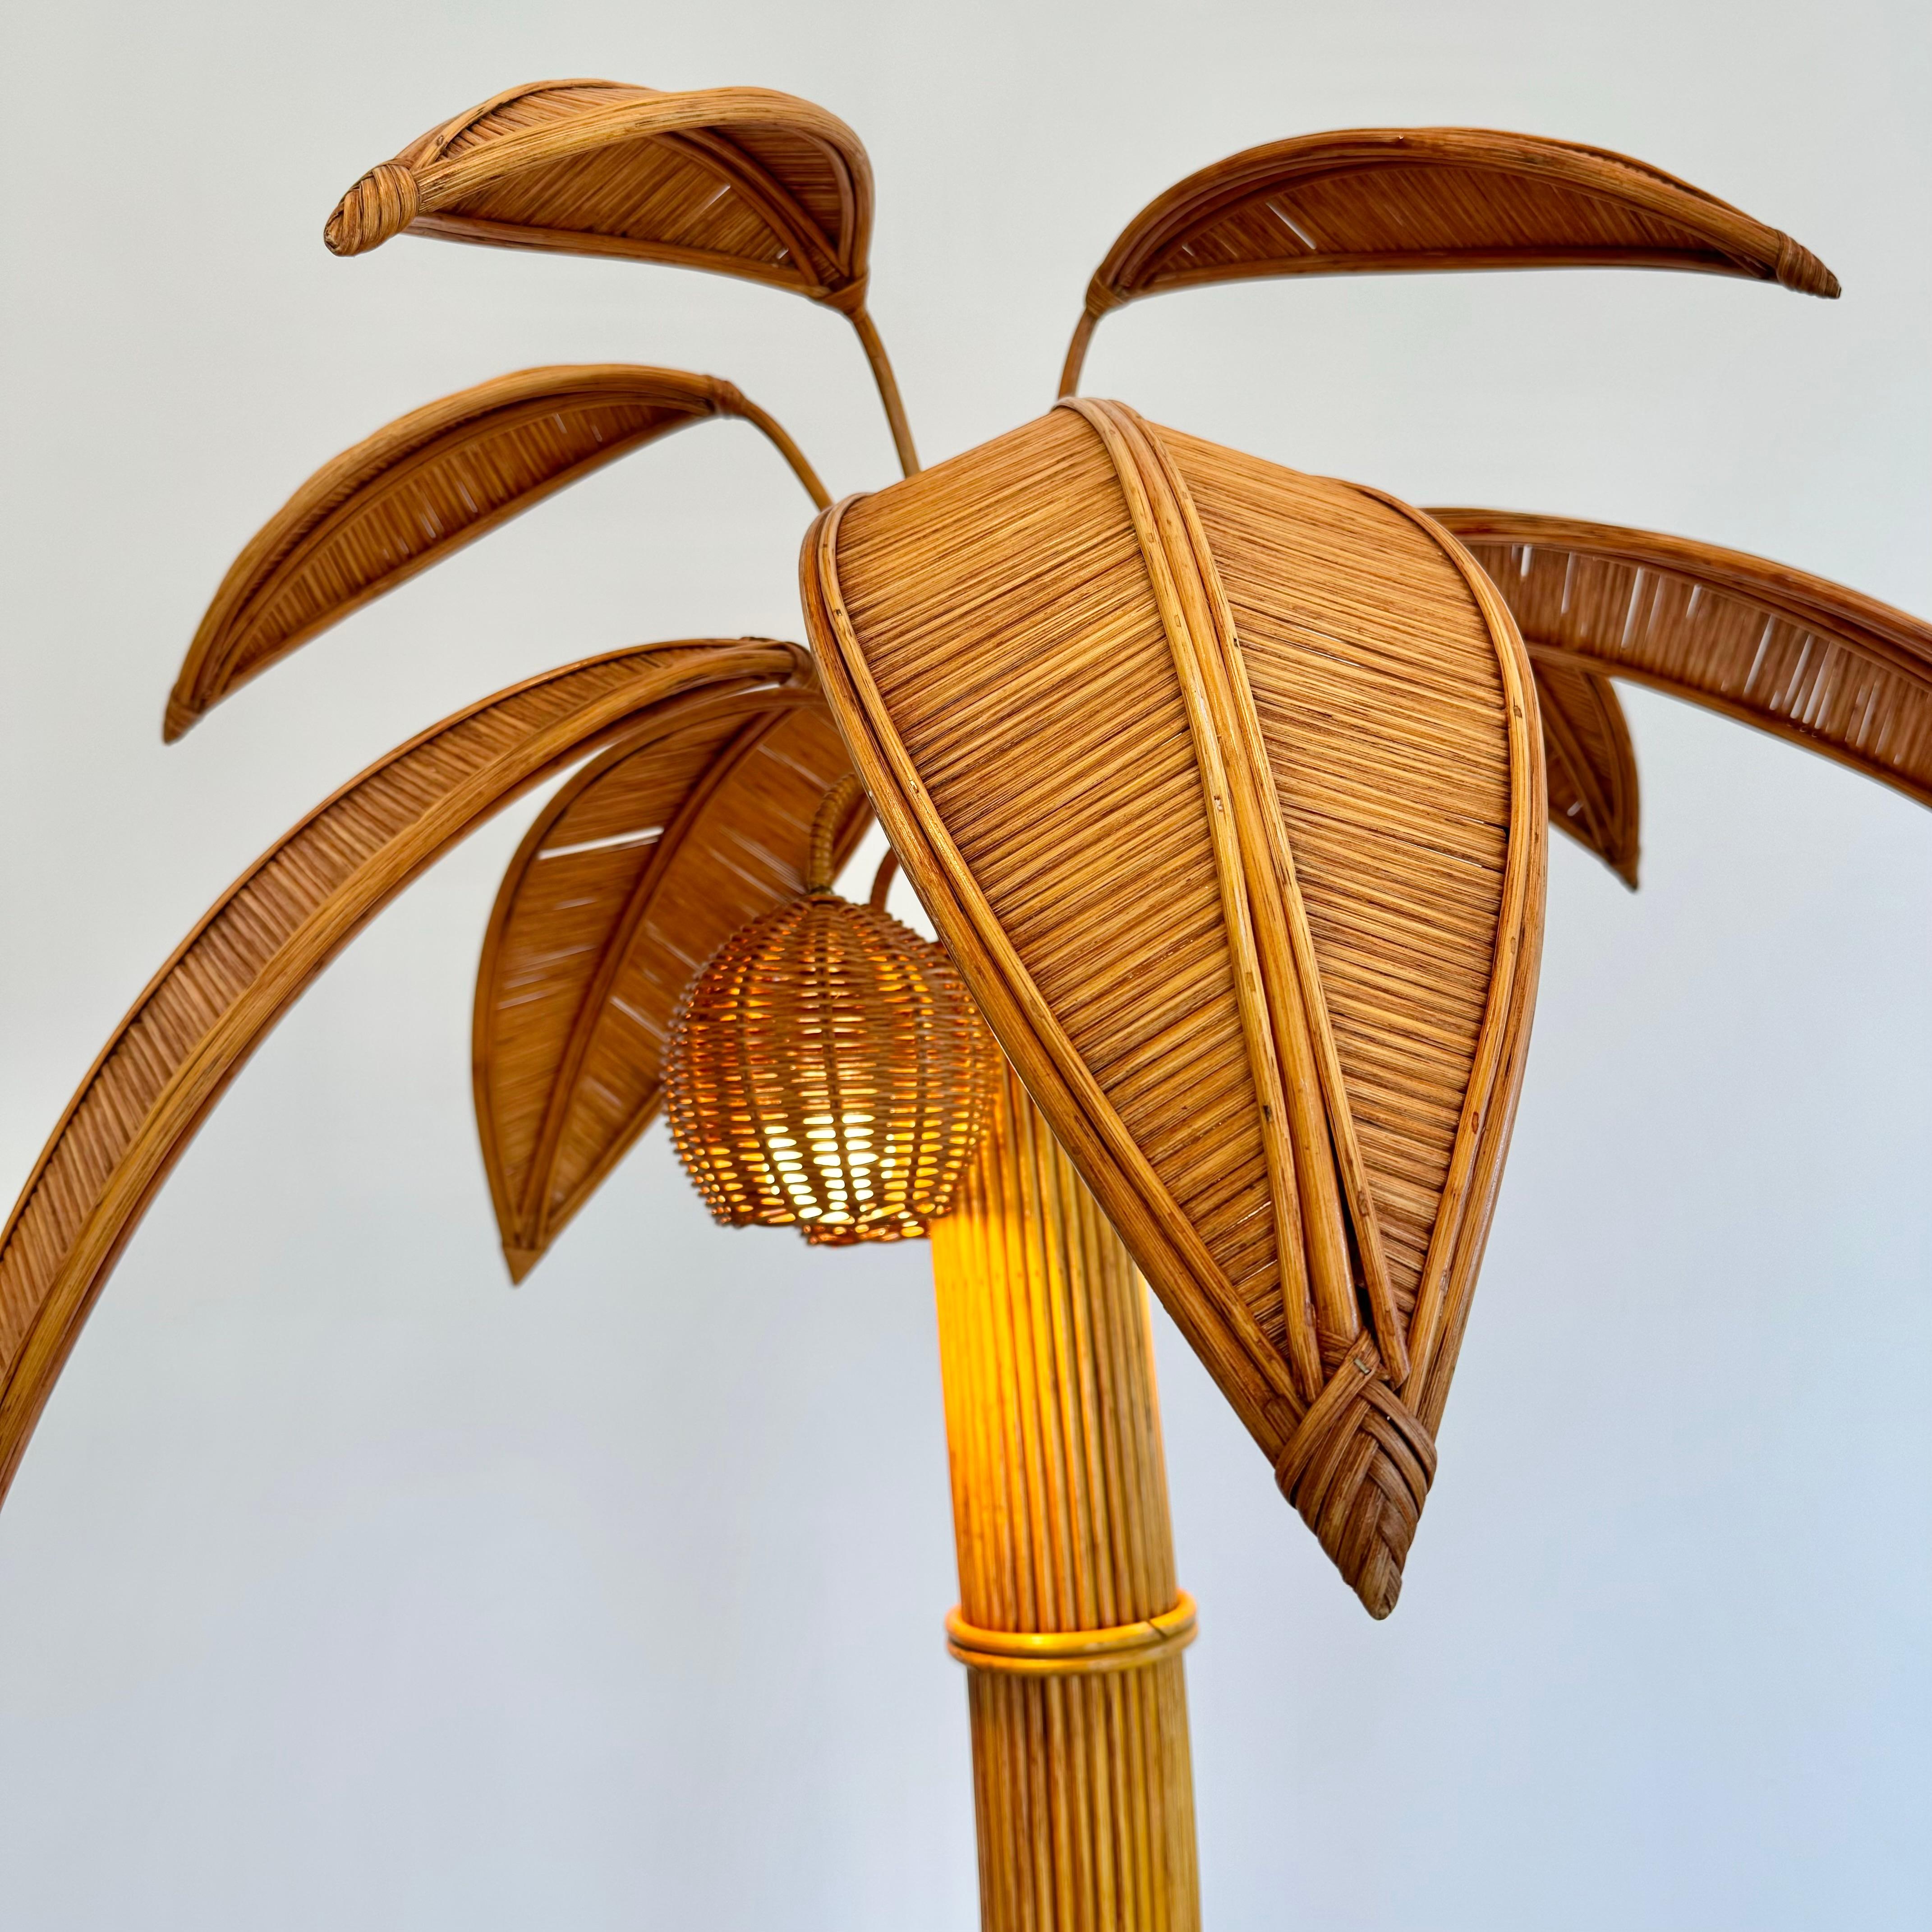 Rattan and Wicker Palm Tree Floor Lamp, 1970s United States For Sale 3